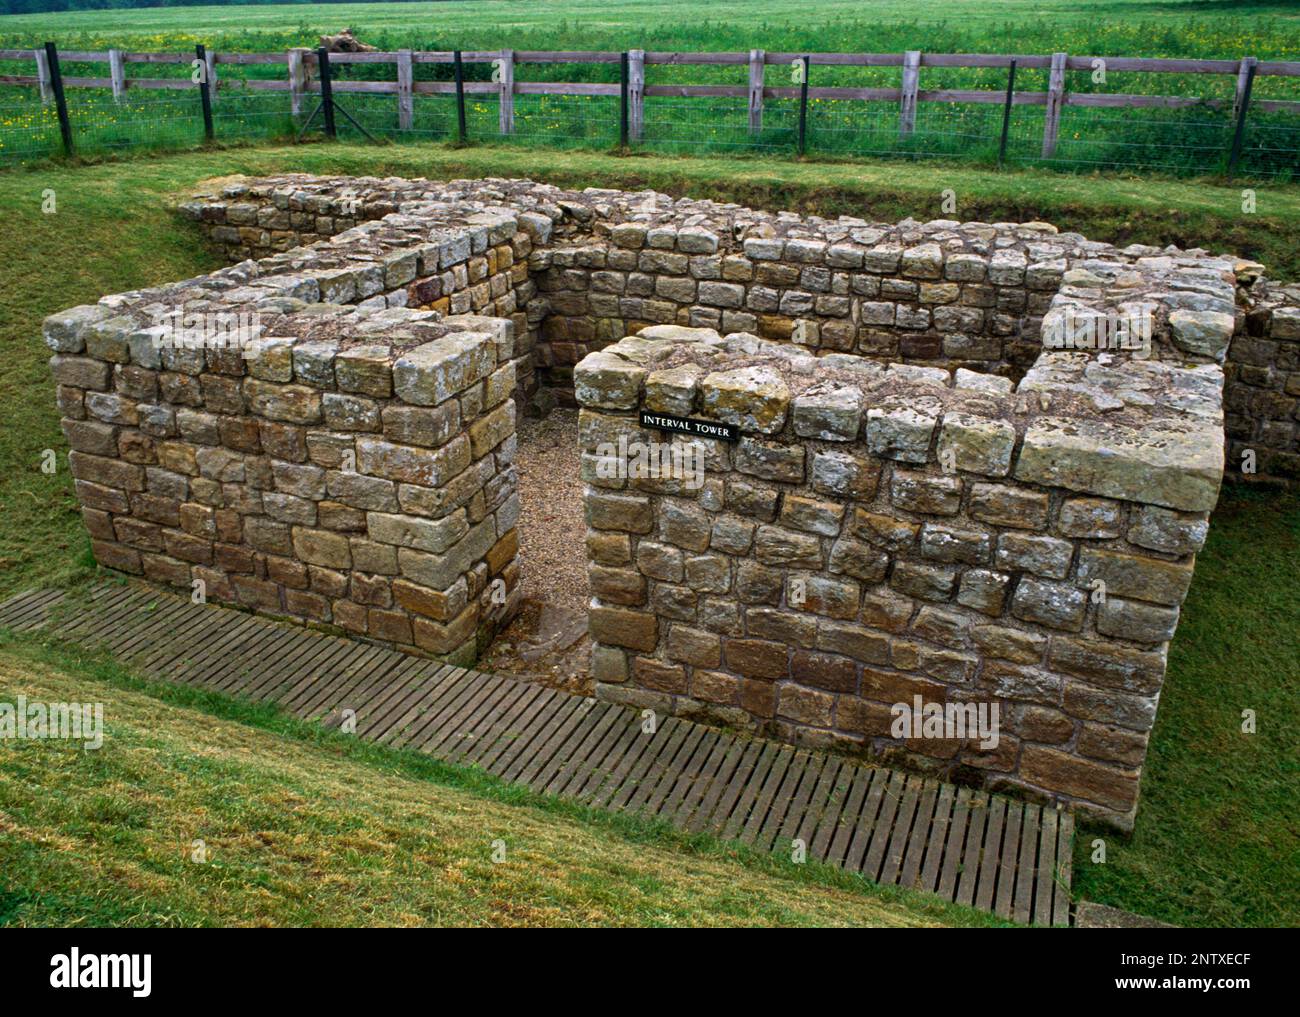 Interval tower inside the S wall of Chesters Roman fort, Hadrian's Wall, Northumberland, England, UK, between the S gate & SE angle tower. Stock Photo